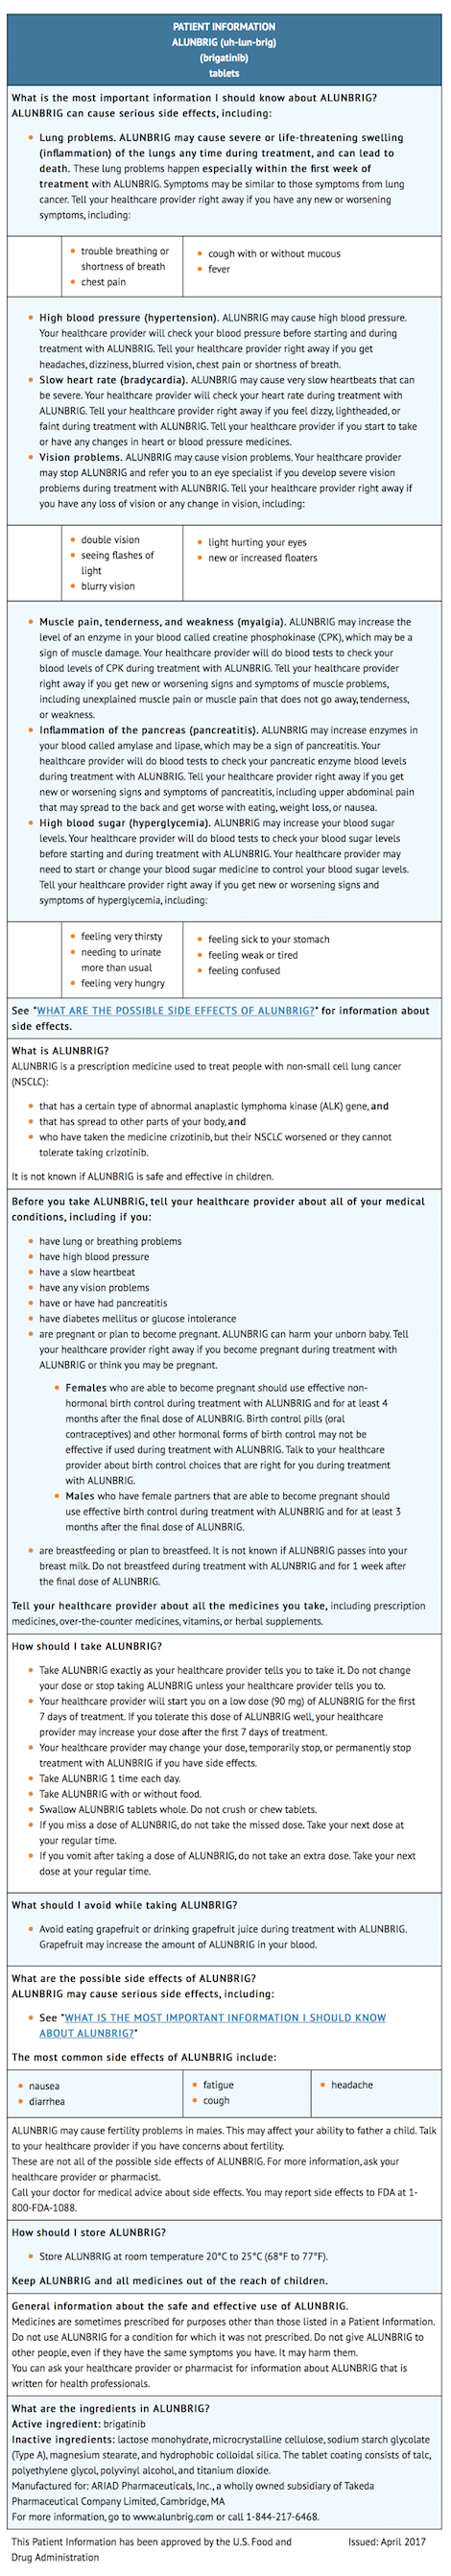 File:Brigatinib Patient Counseling Information.png